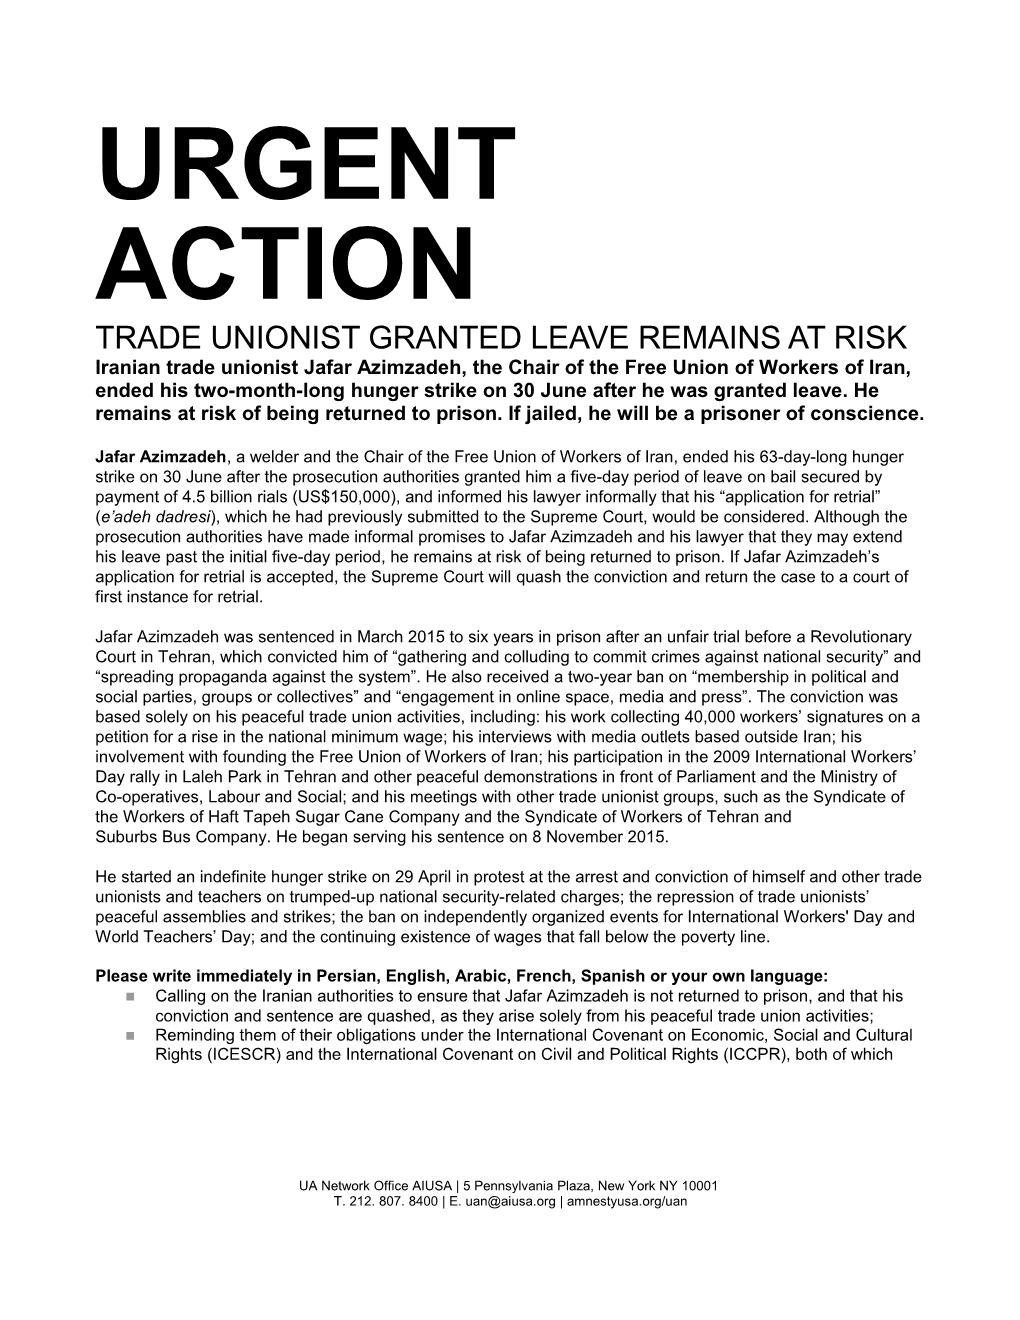 TRADE UNIONIST Granted Leave Remains at Risk